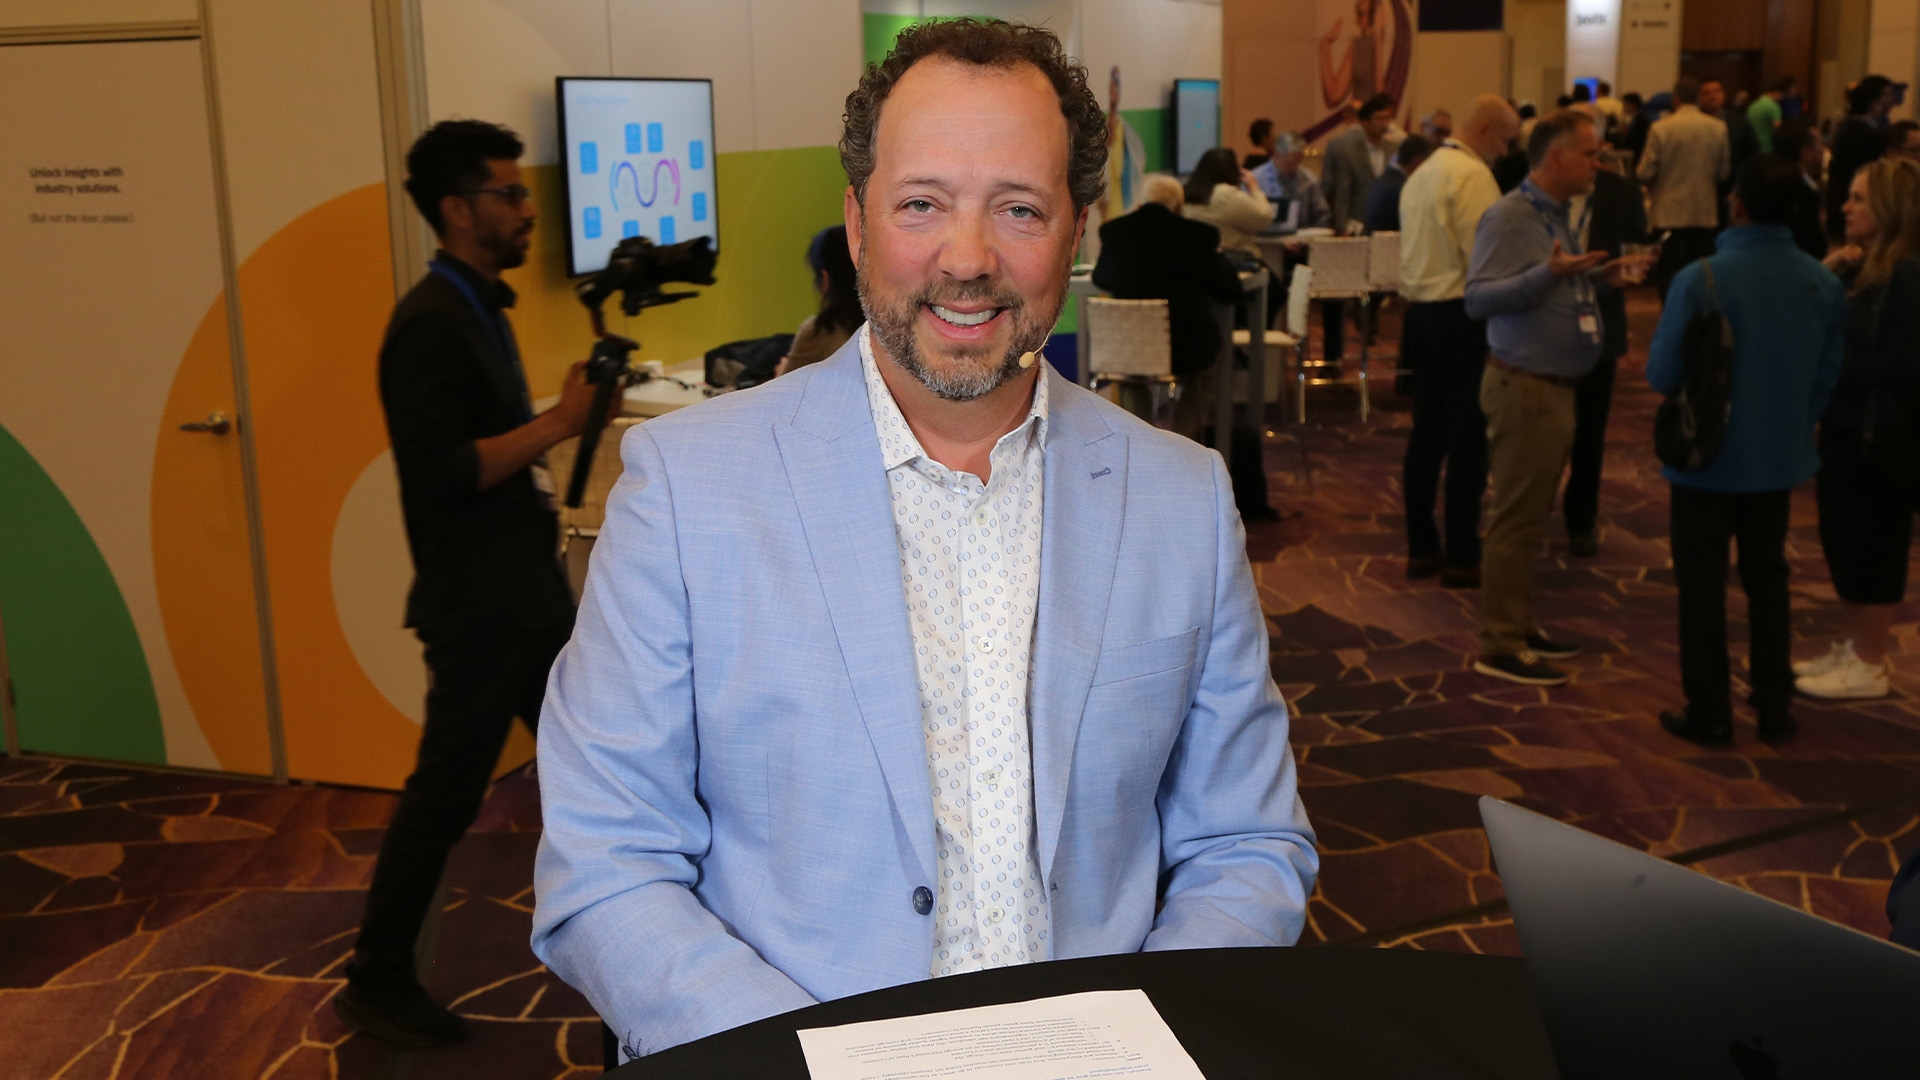 Jason Mann, vice president of internet of things at SAS Institute Inc., talks with theCUBE during SAS Innovate about how the company is accelerating sustainability efforts through out-of-the-box approaches, such as Energy Cost Optimization that incorporates IoT sensors.